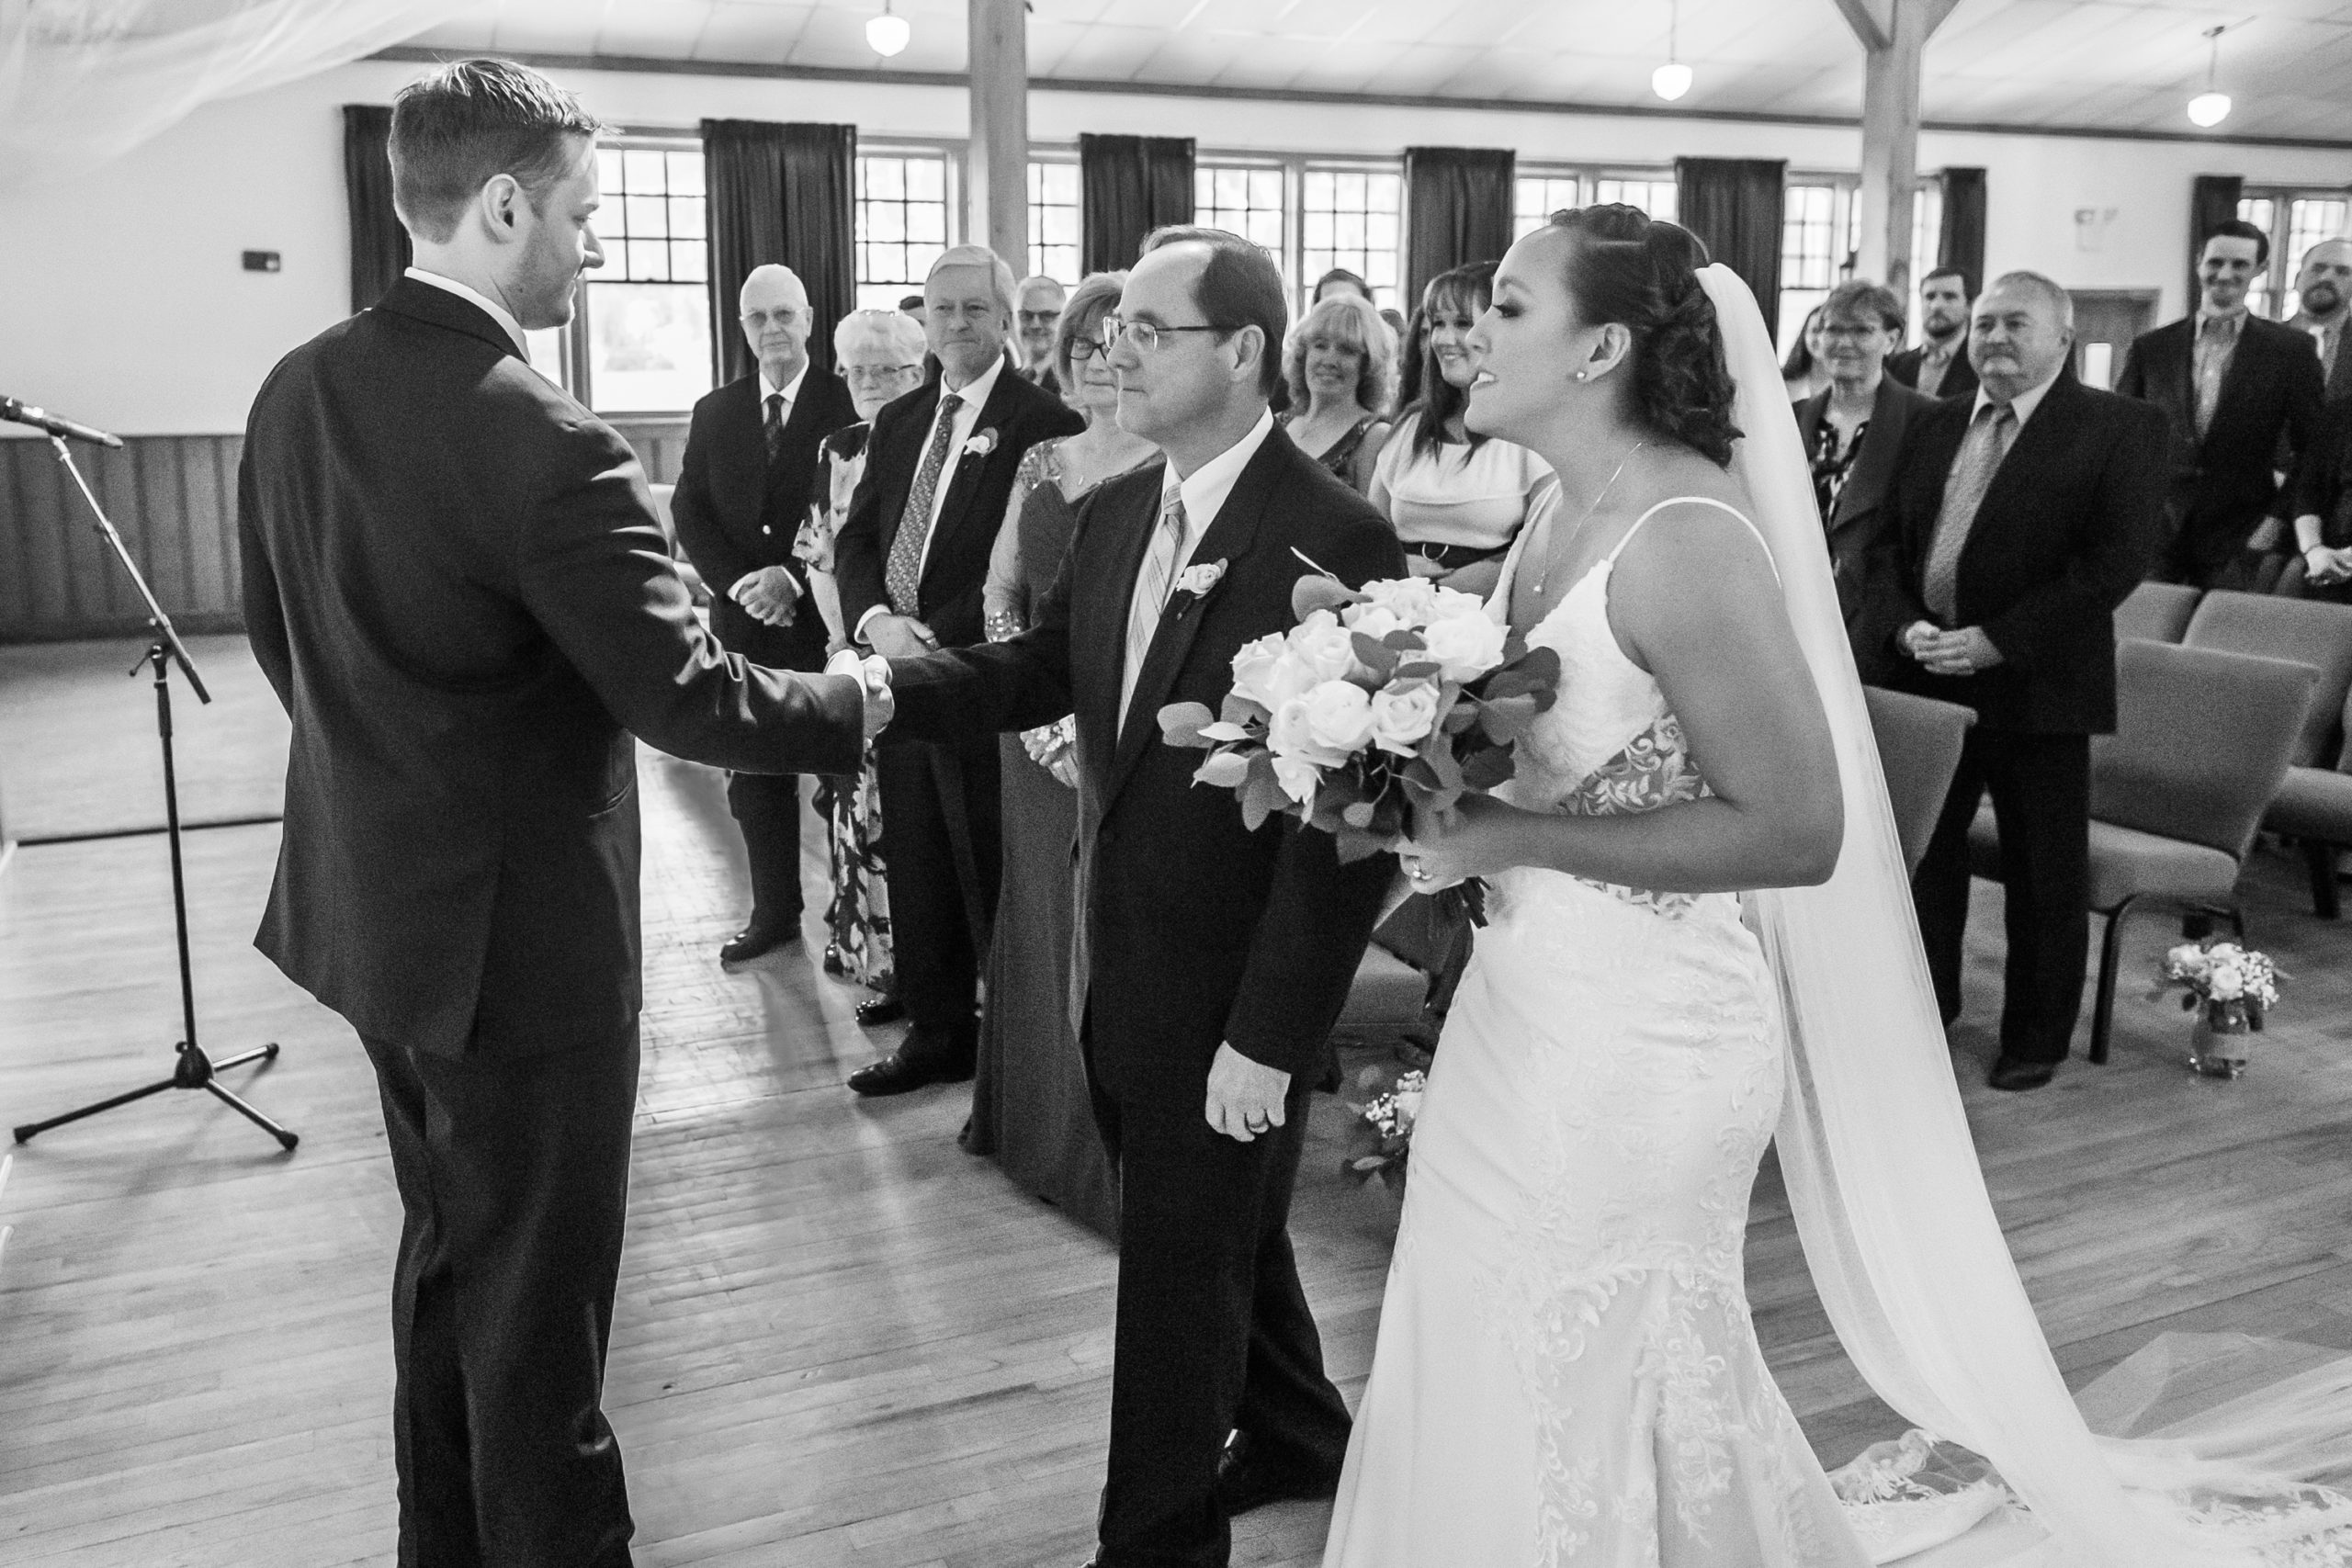 The bride processes in with her father to greet the groom during a YMCA of the Rockies wedding in Estes Park, Colorado.